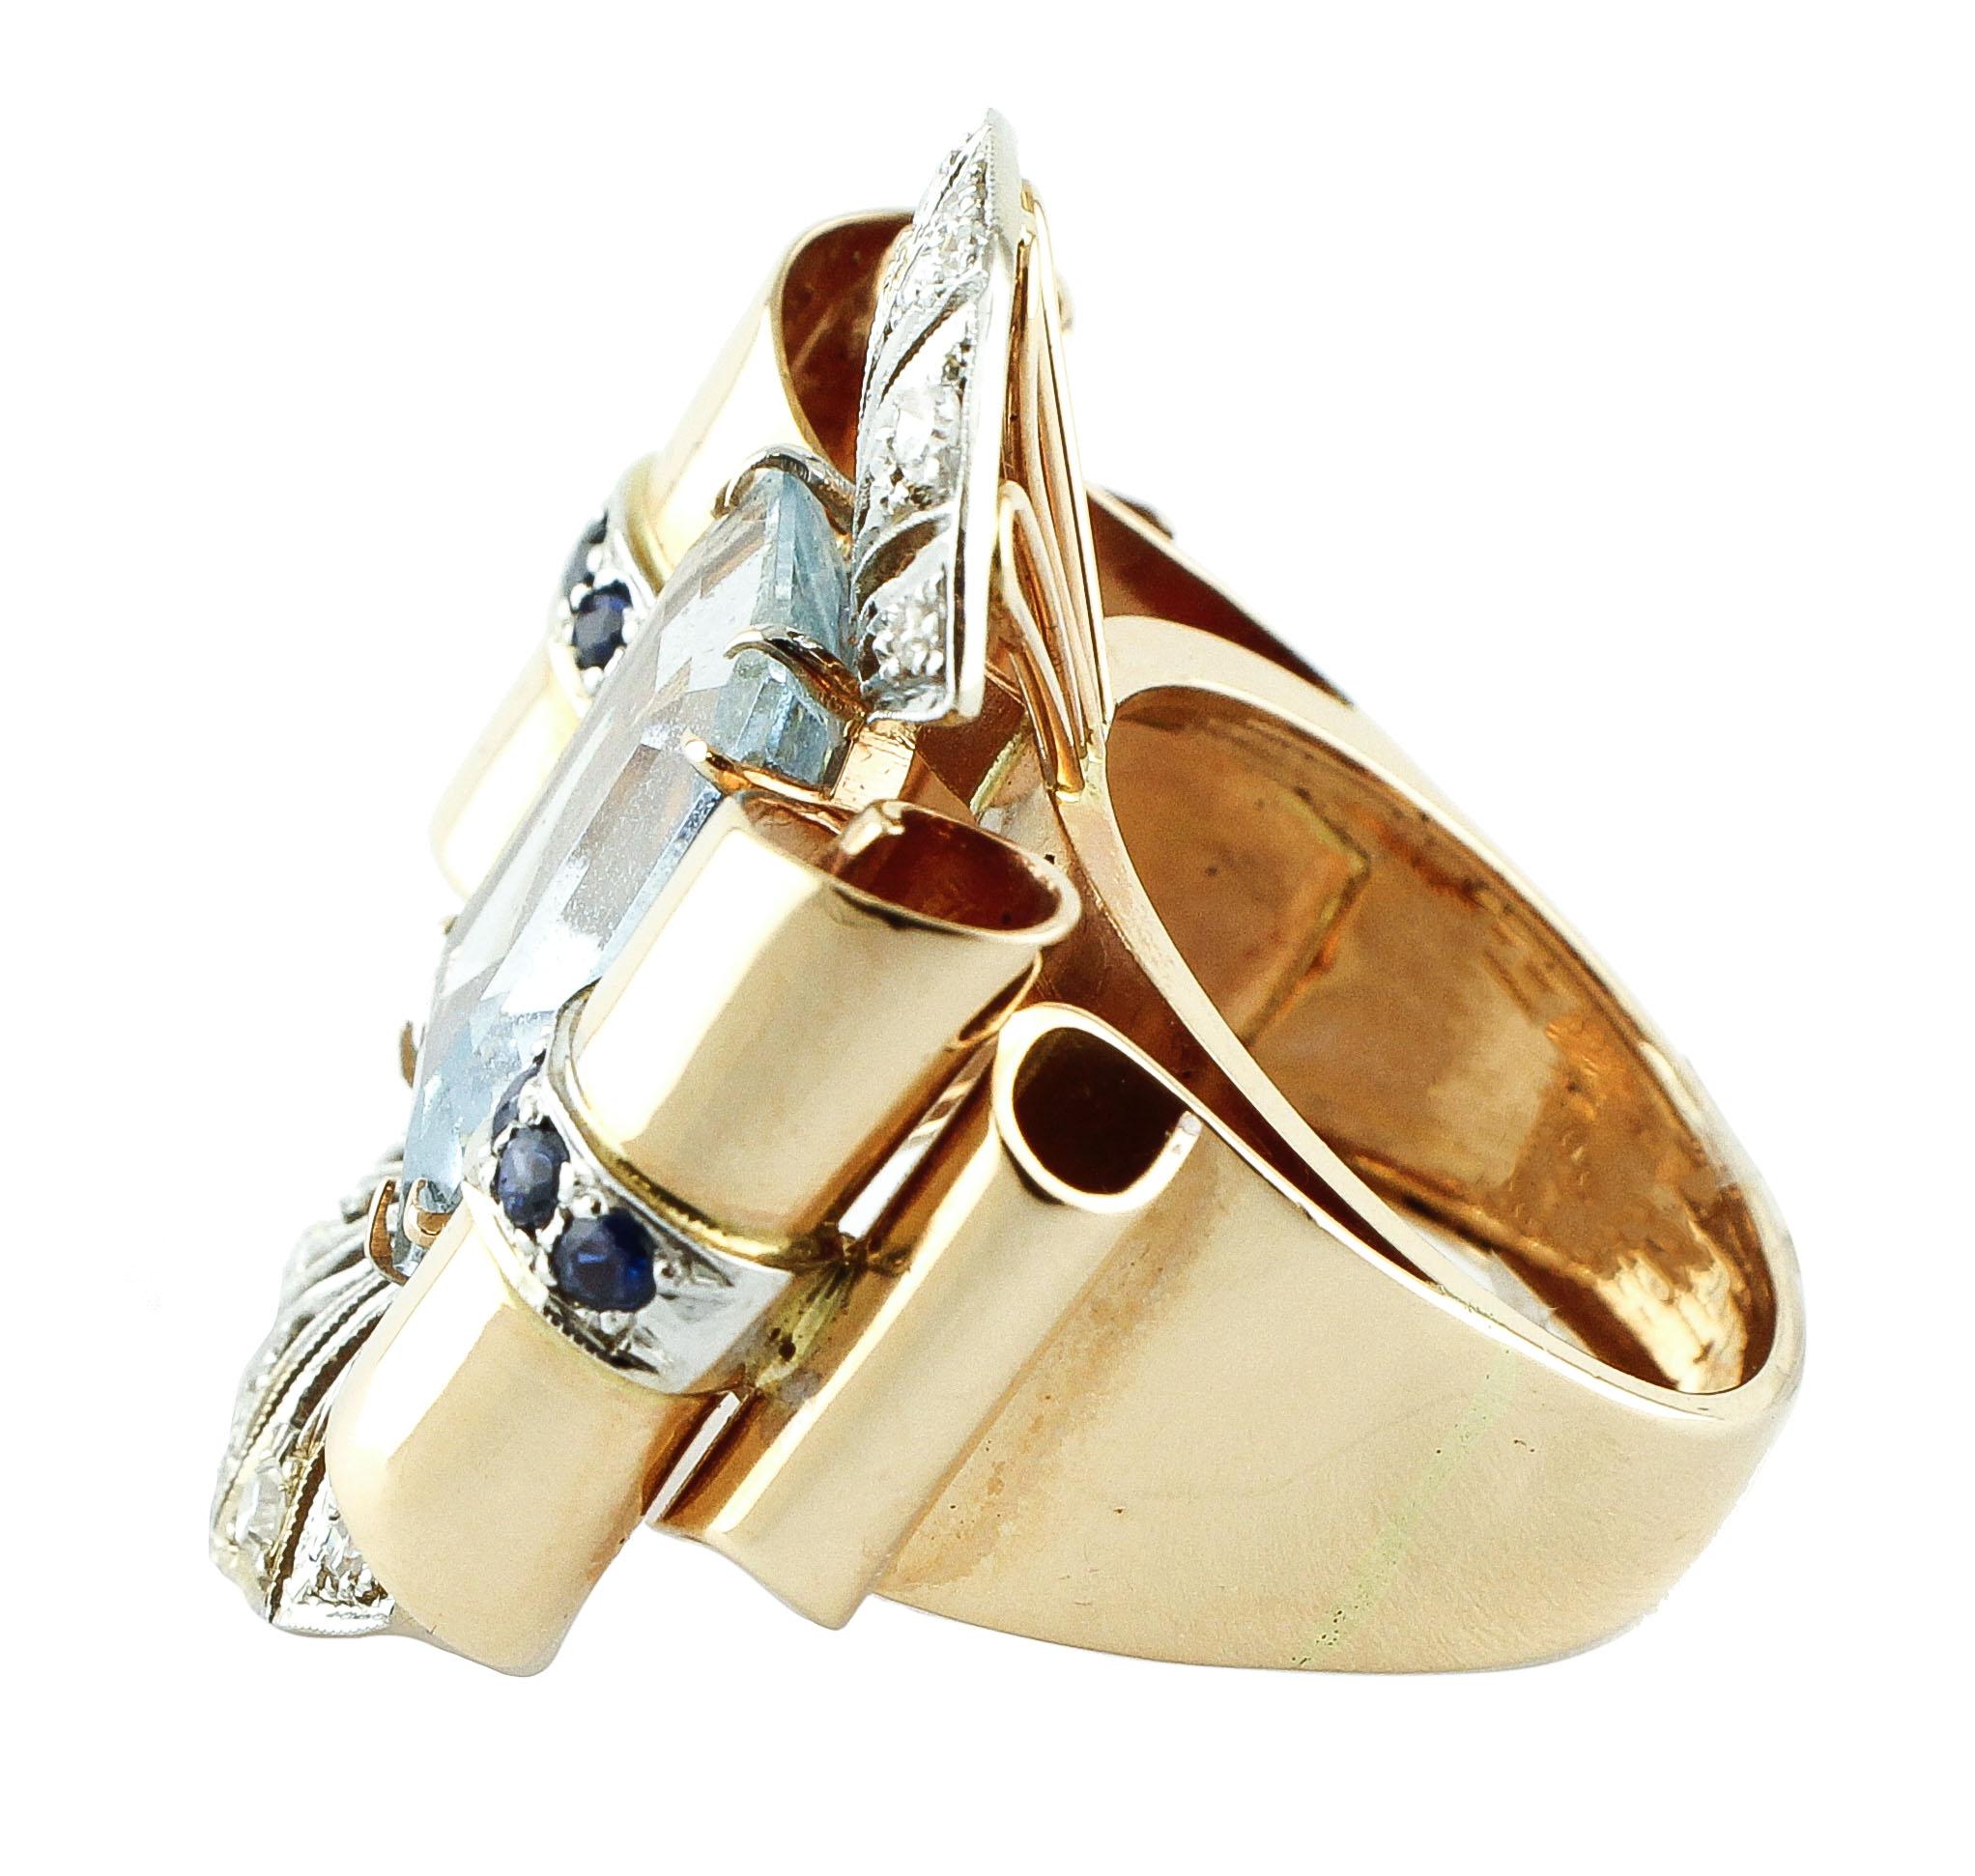 Fashion design ring (bow shape) in 14K rose and white gold composed of 6.70 ct of aquamarine, adorned on the two sides by 0.50 ct of blue sapphire and finally at the top and at the end, it is studded by 0.30 ct little white diamonds.
Diamonds 0.30